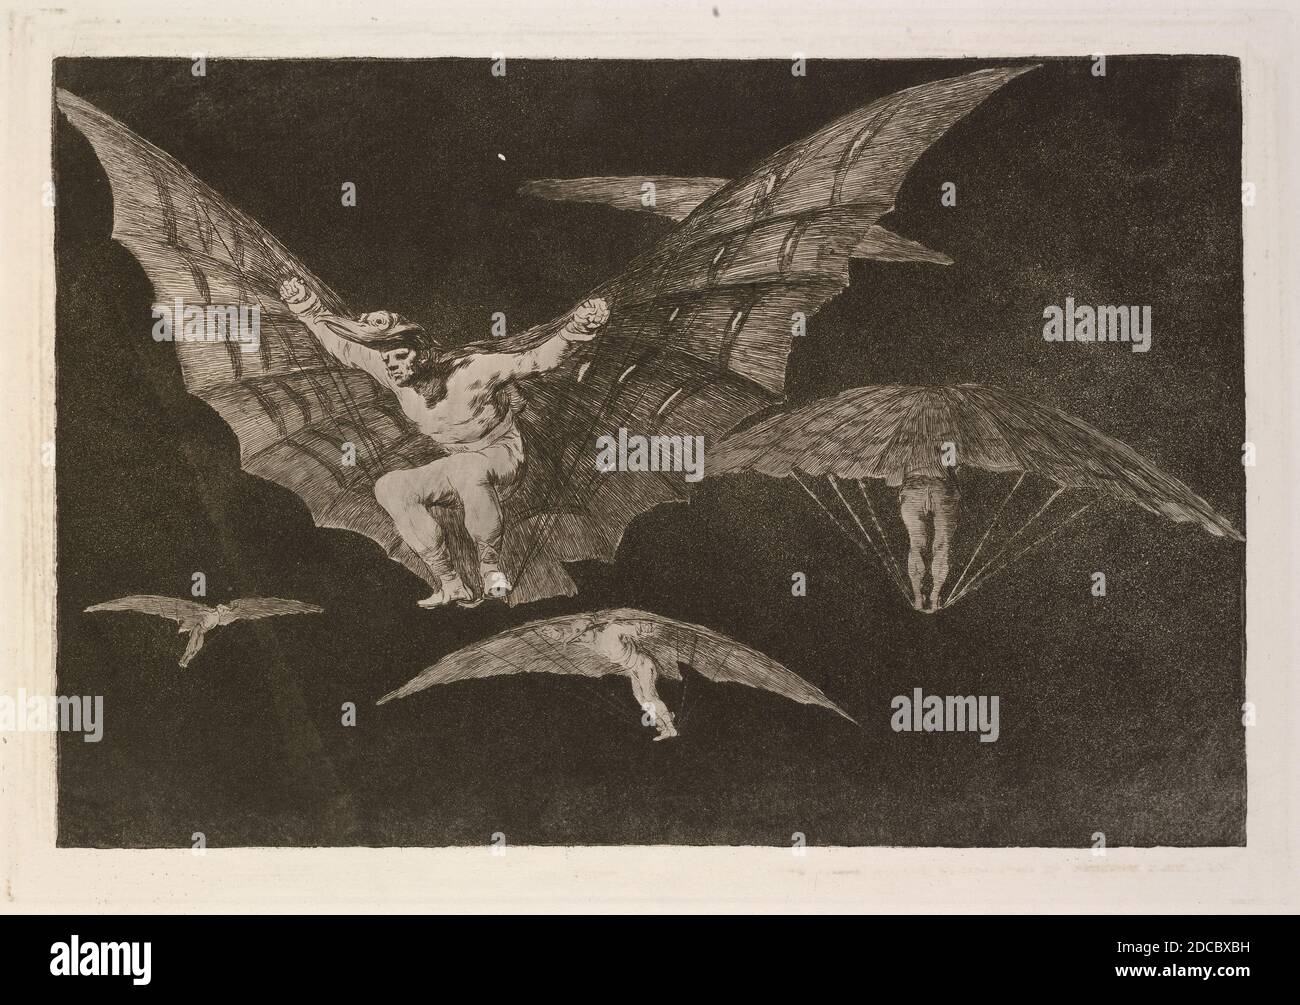 Francisco de Goya, (artist), Spanish, 1746 - 1828, Modo de volar (A Way of Flying), Proverbios: pl.13, (series), published 1864, etching, aquatint, and drypoint Stock Photo